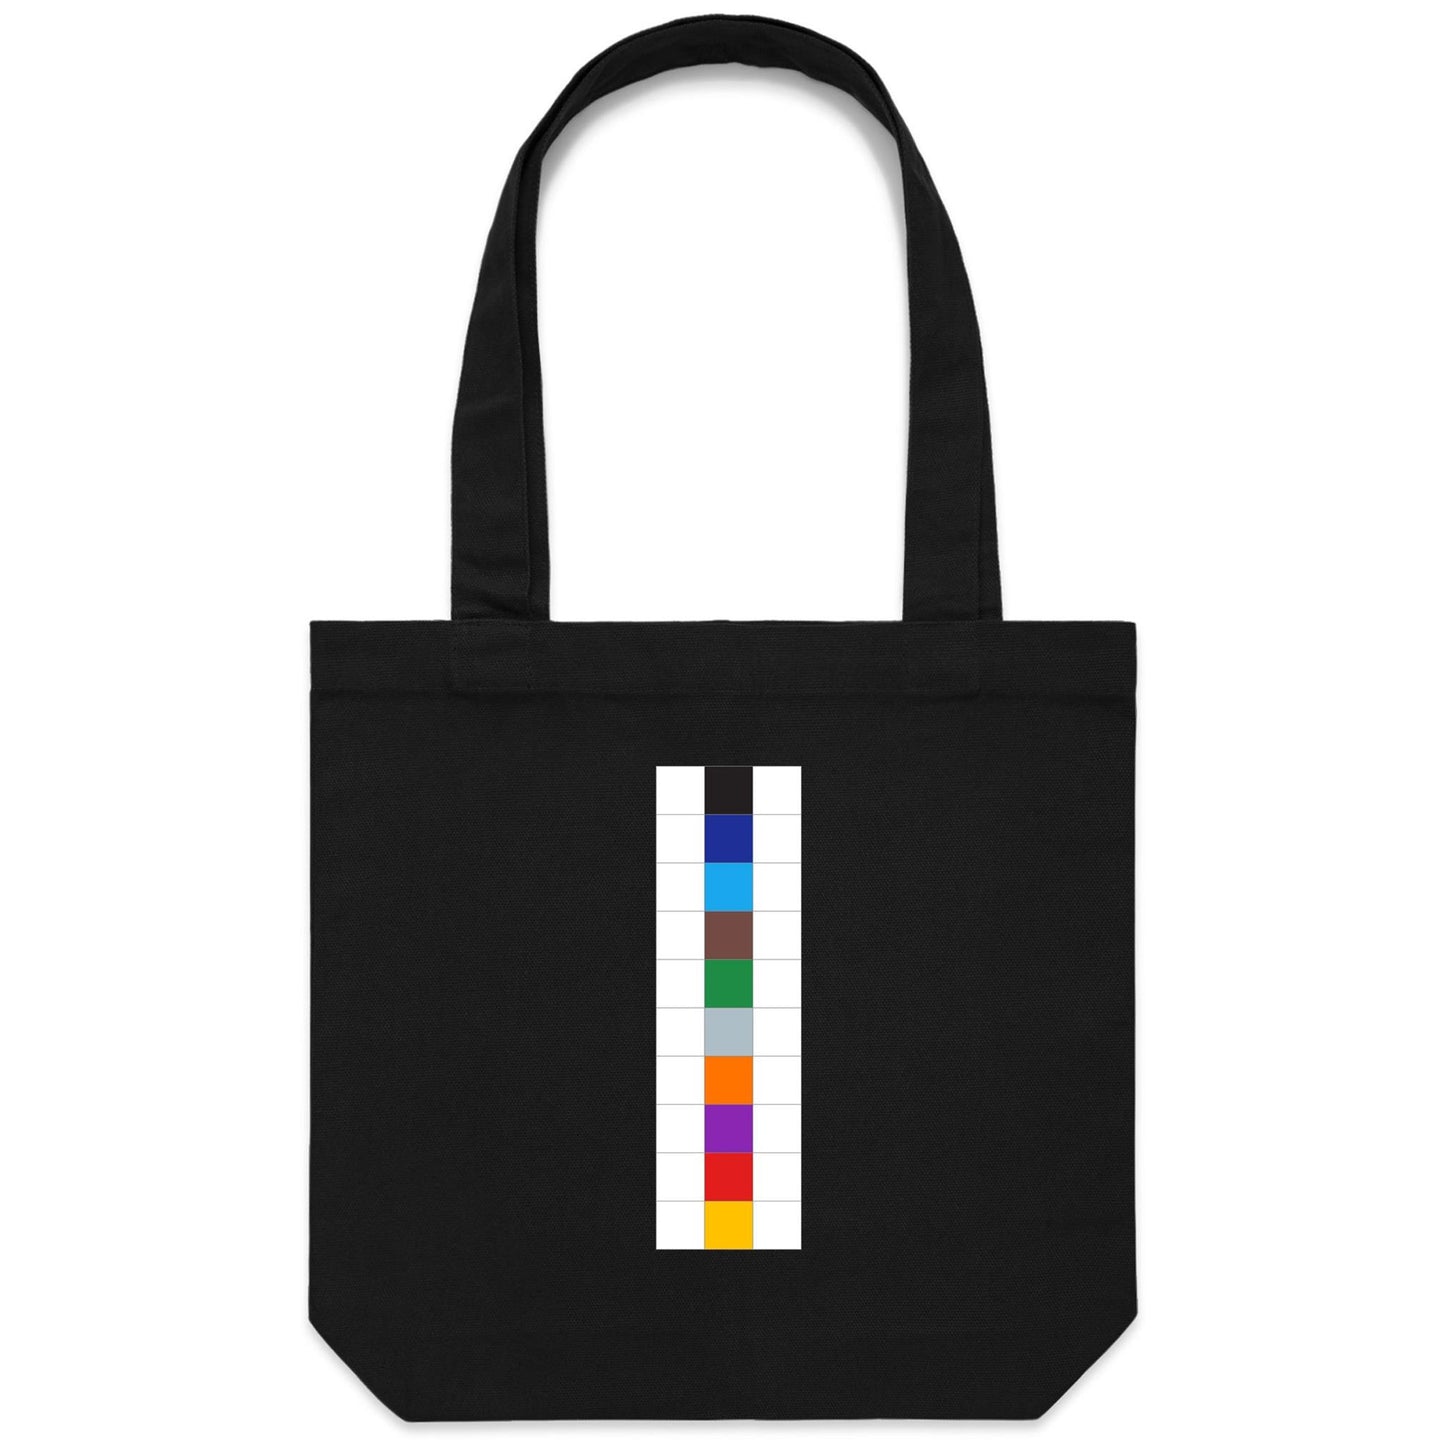 The Hanky Code Canvas Totes